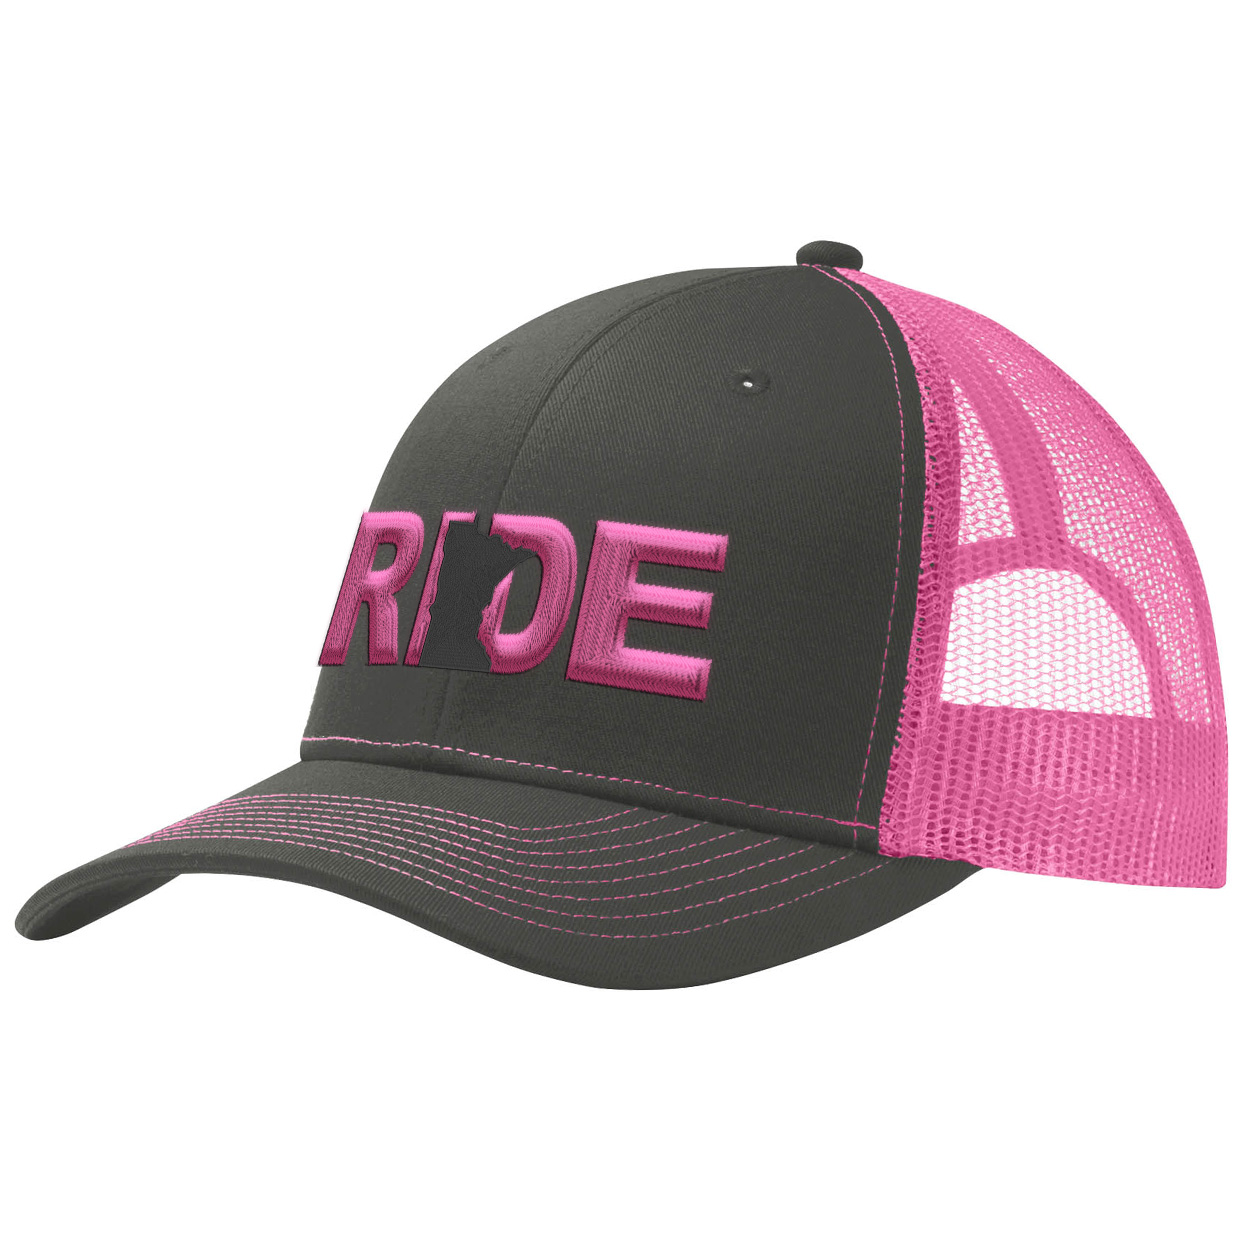 Ride Minnesota Classic Pro 3D Puff Embroidered Snapback Trucker Hat Gray/Pink